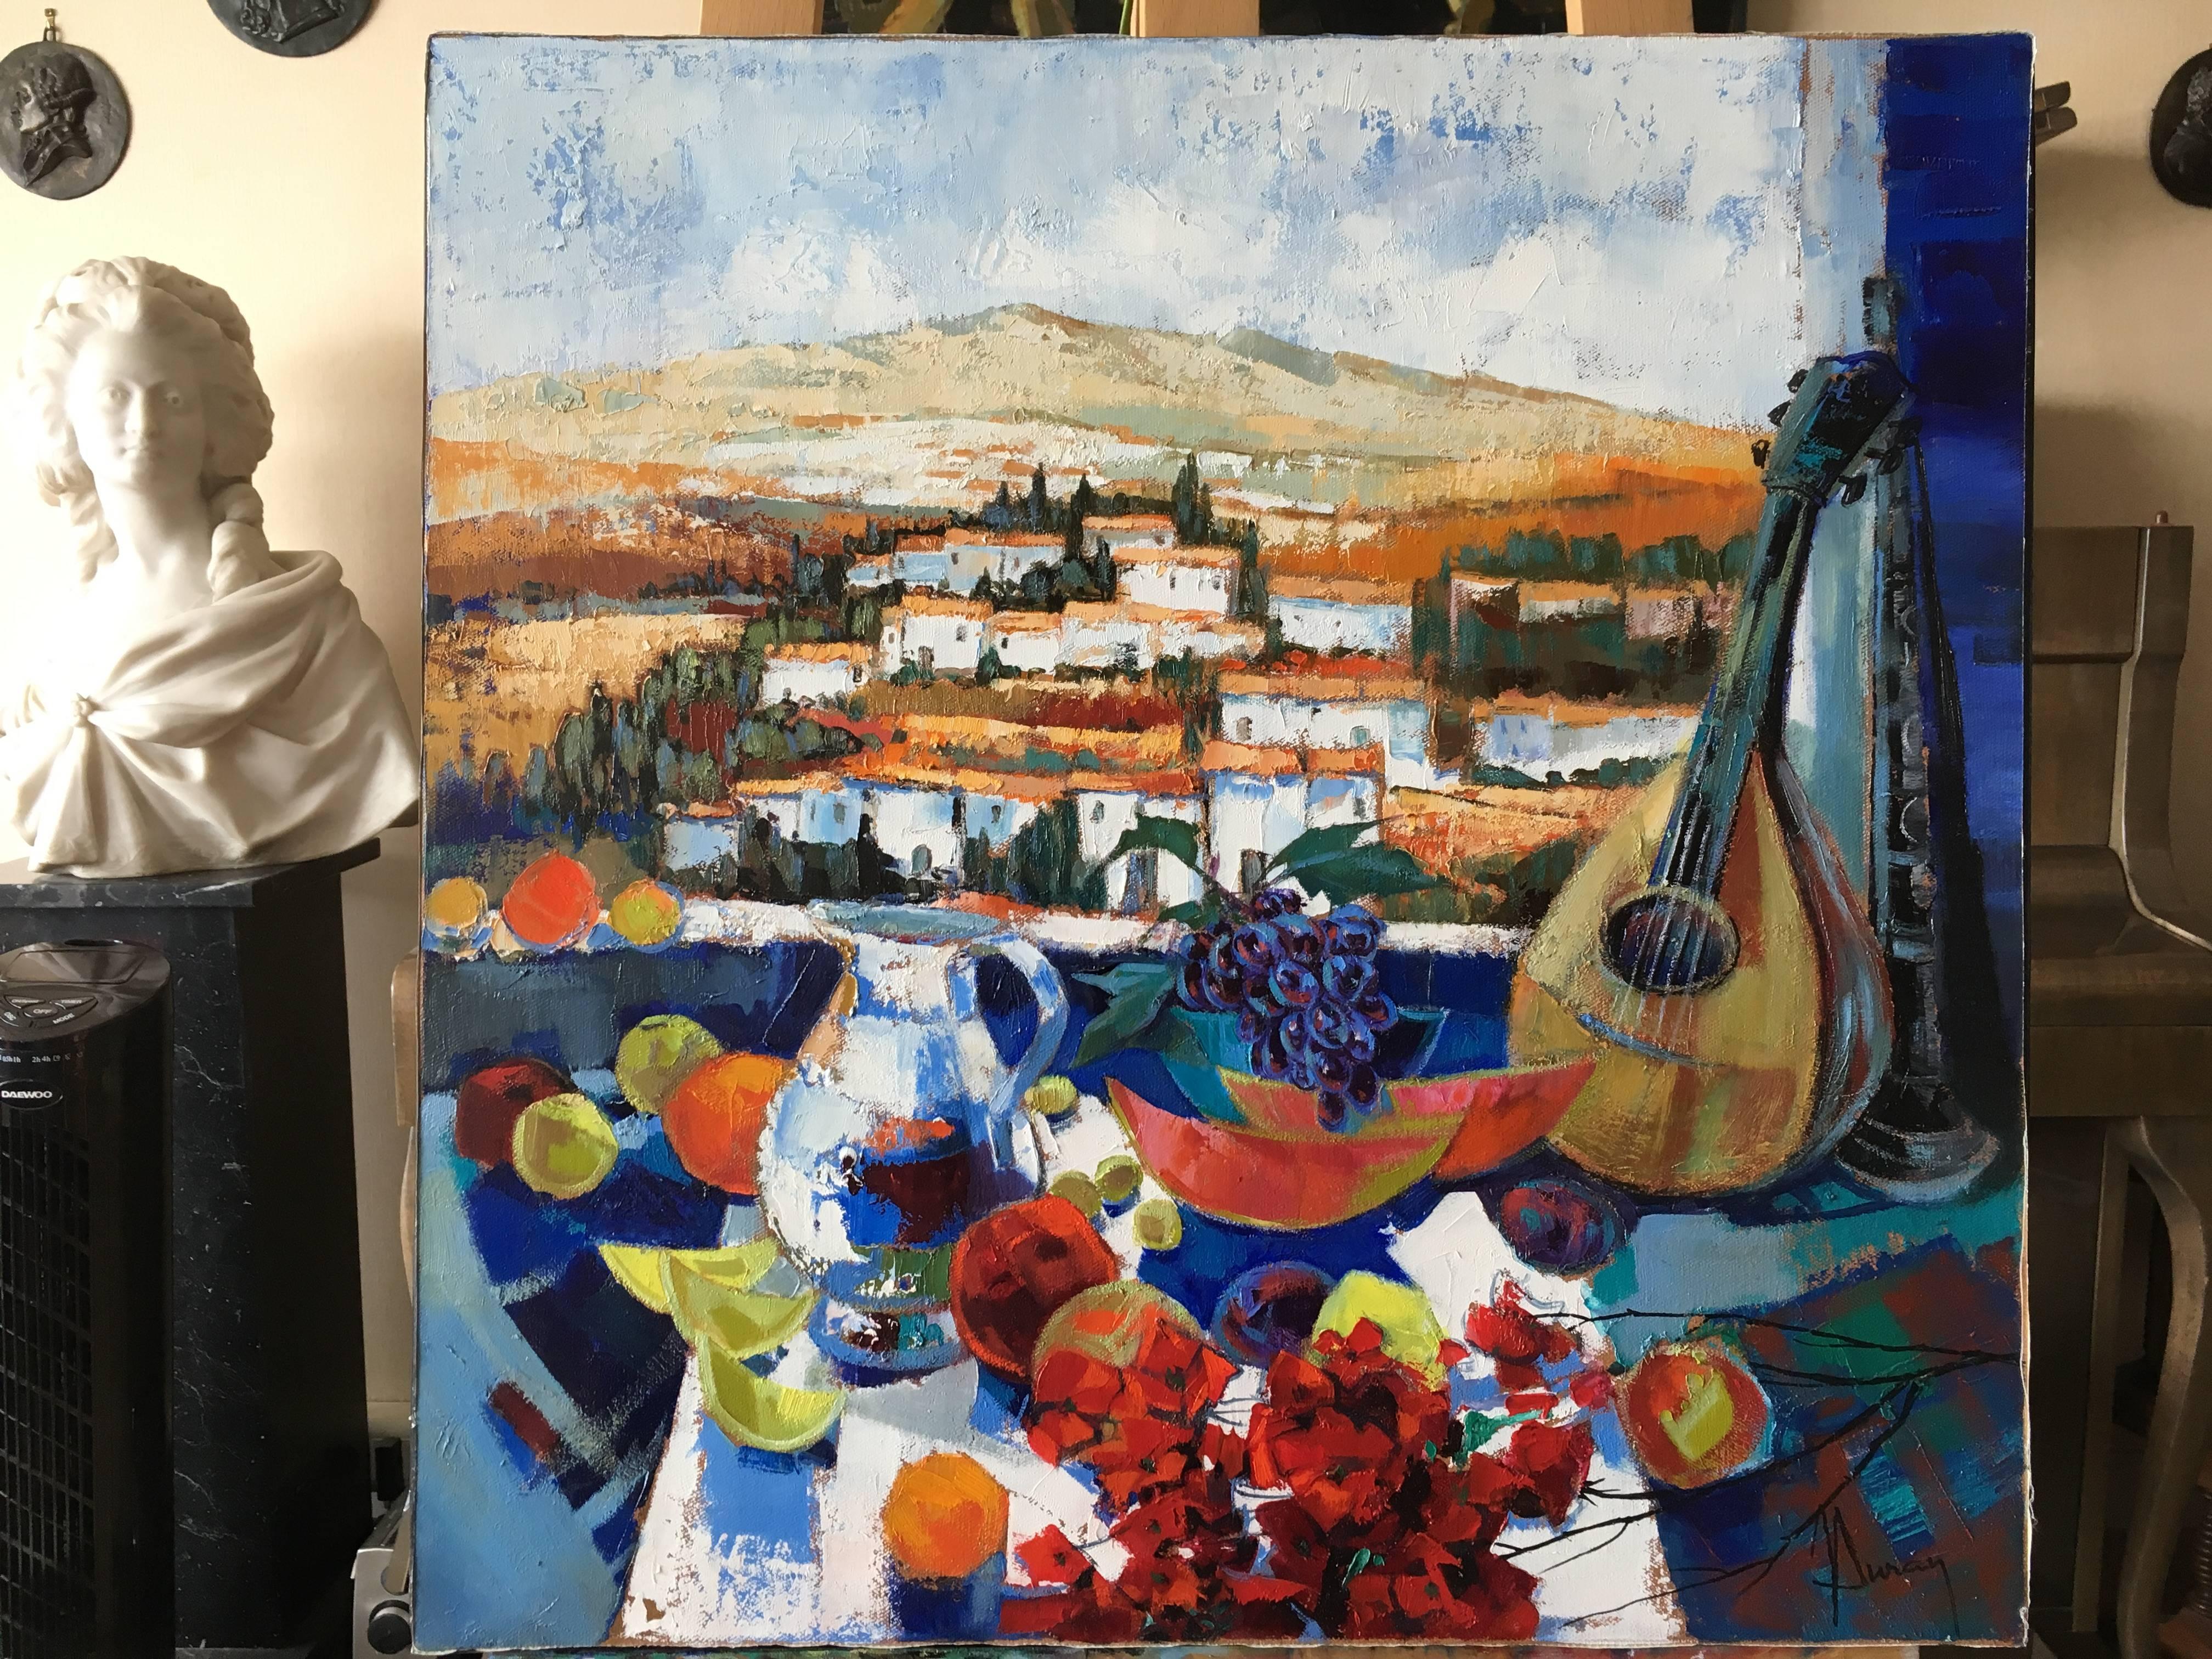 Afternoon snack on the terrace, still life with Spanish landscaape. 3